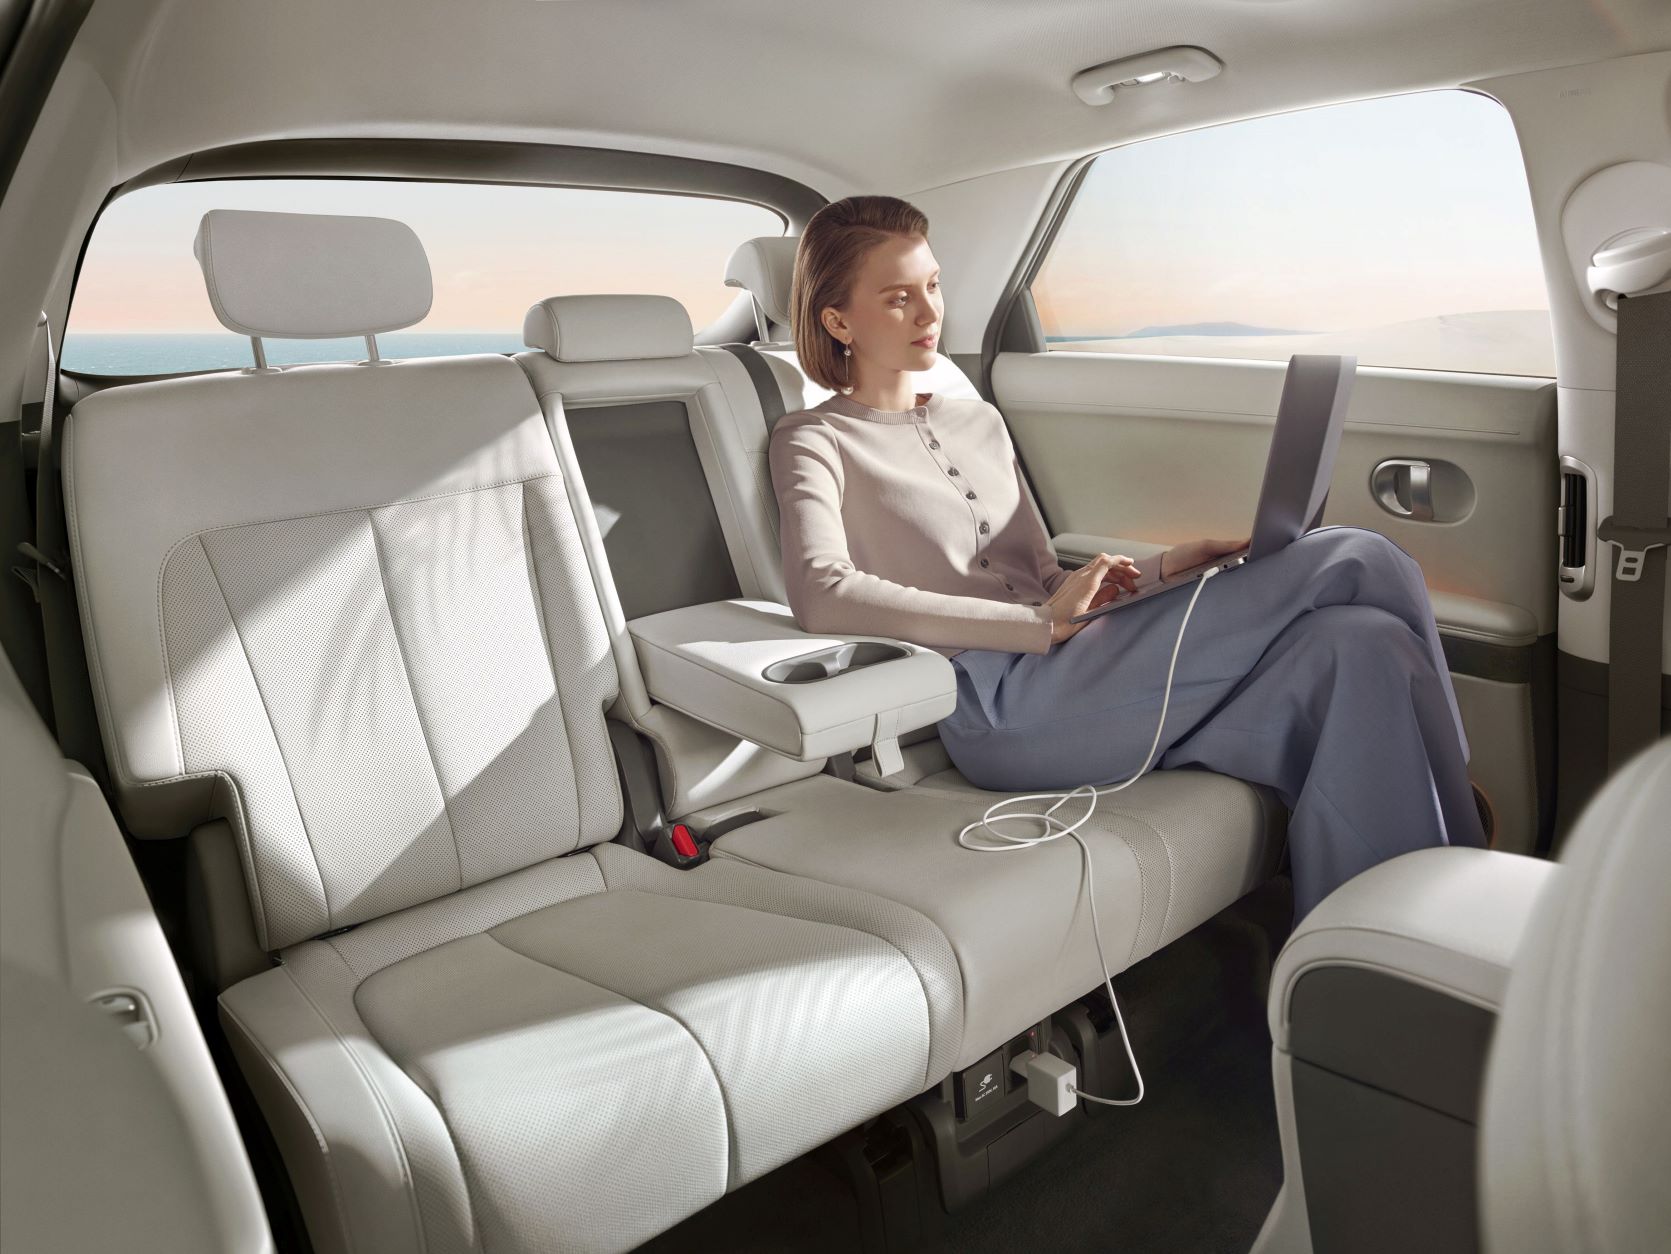 A person sitting in the rear seat of the Hyundai IONIQ 5 charging their device from the household socket